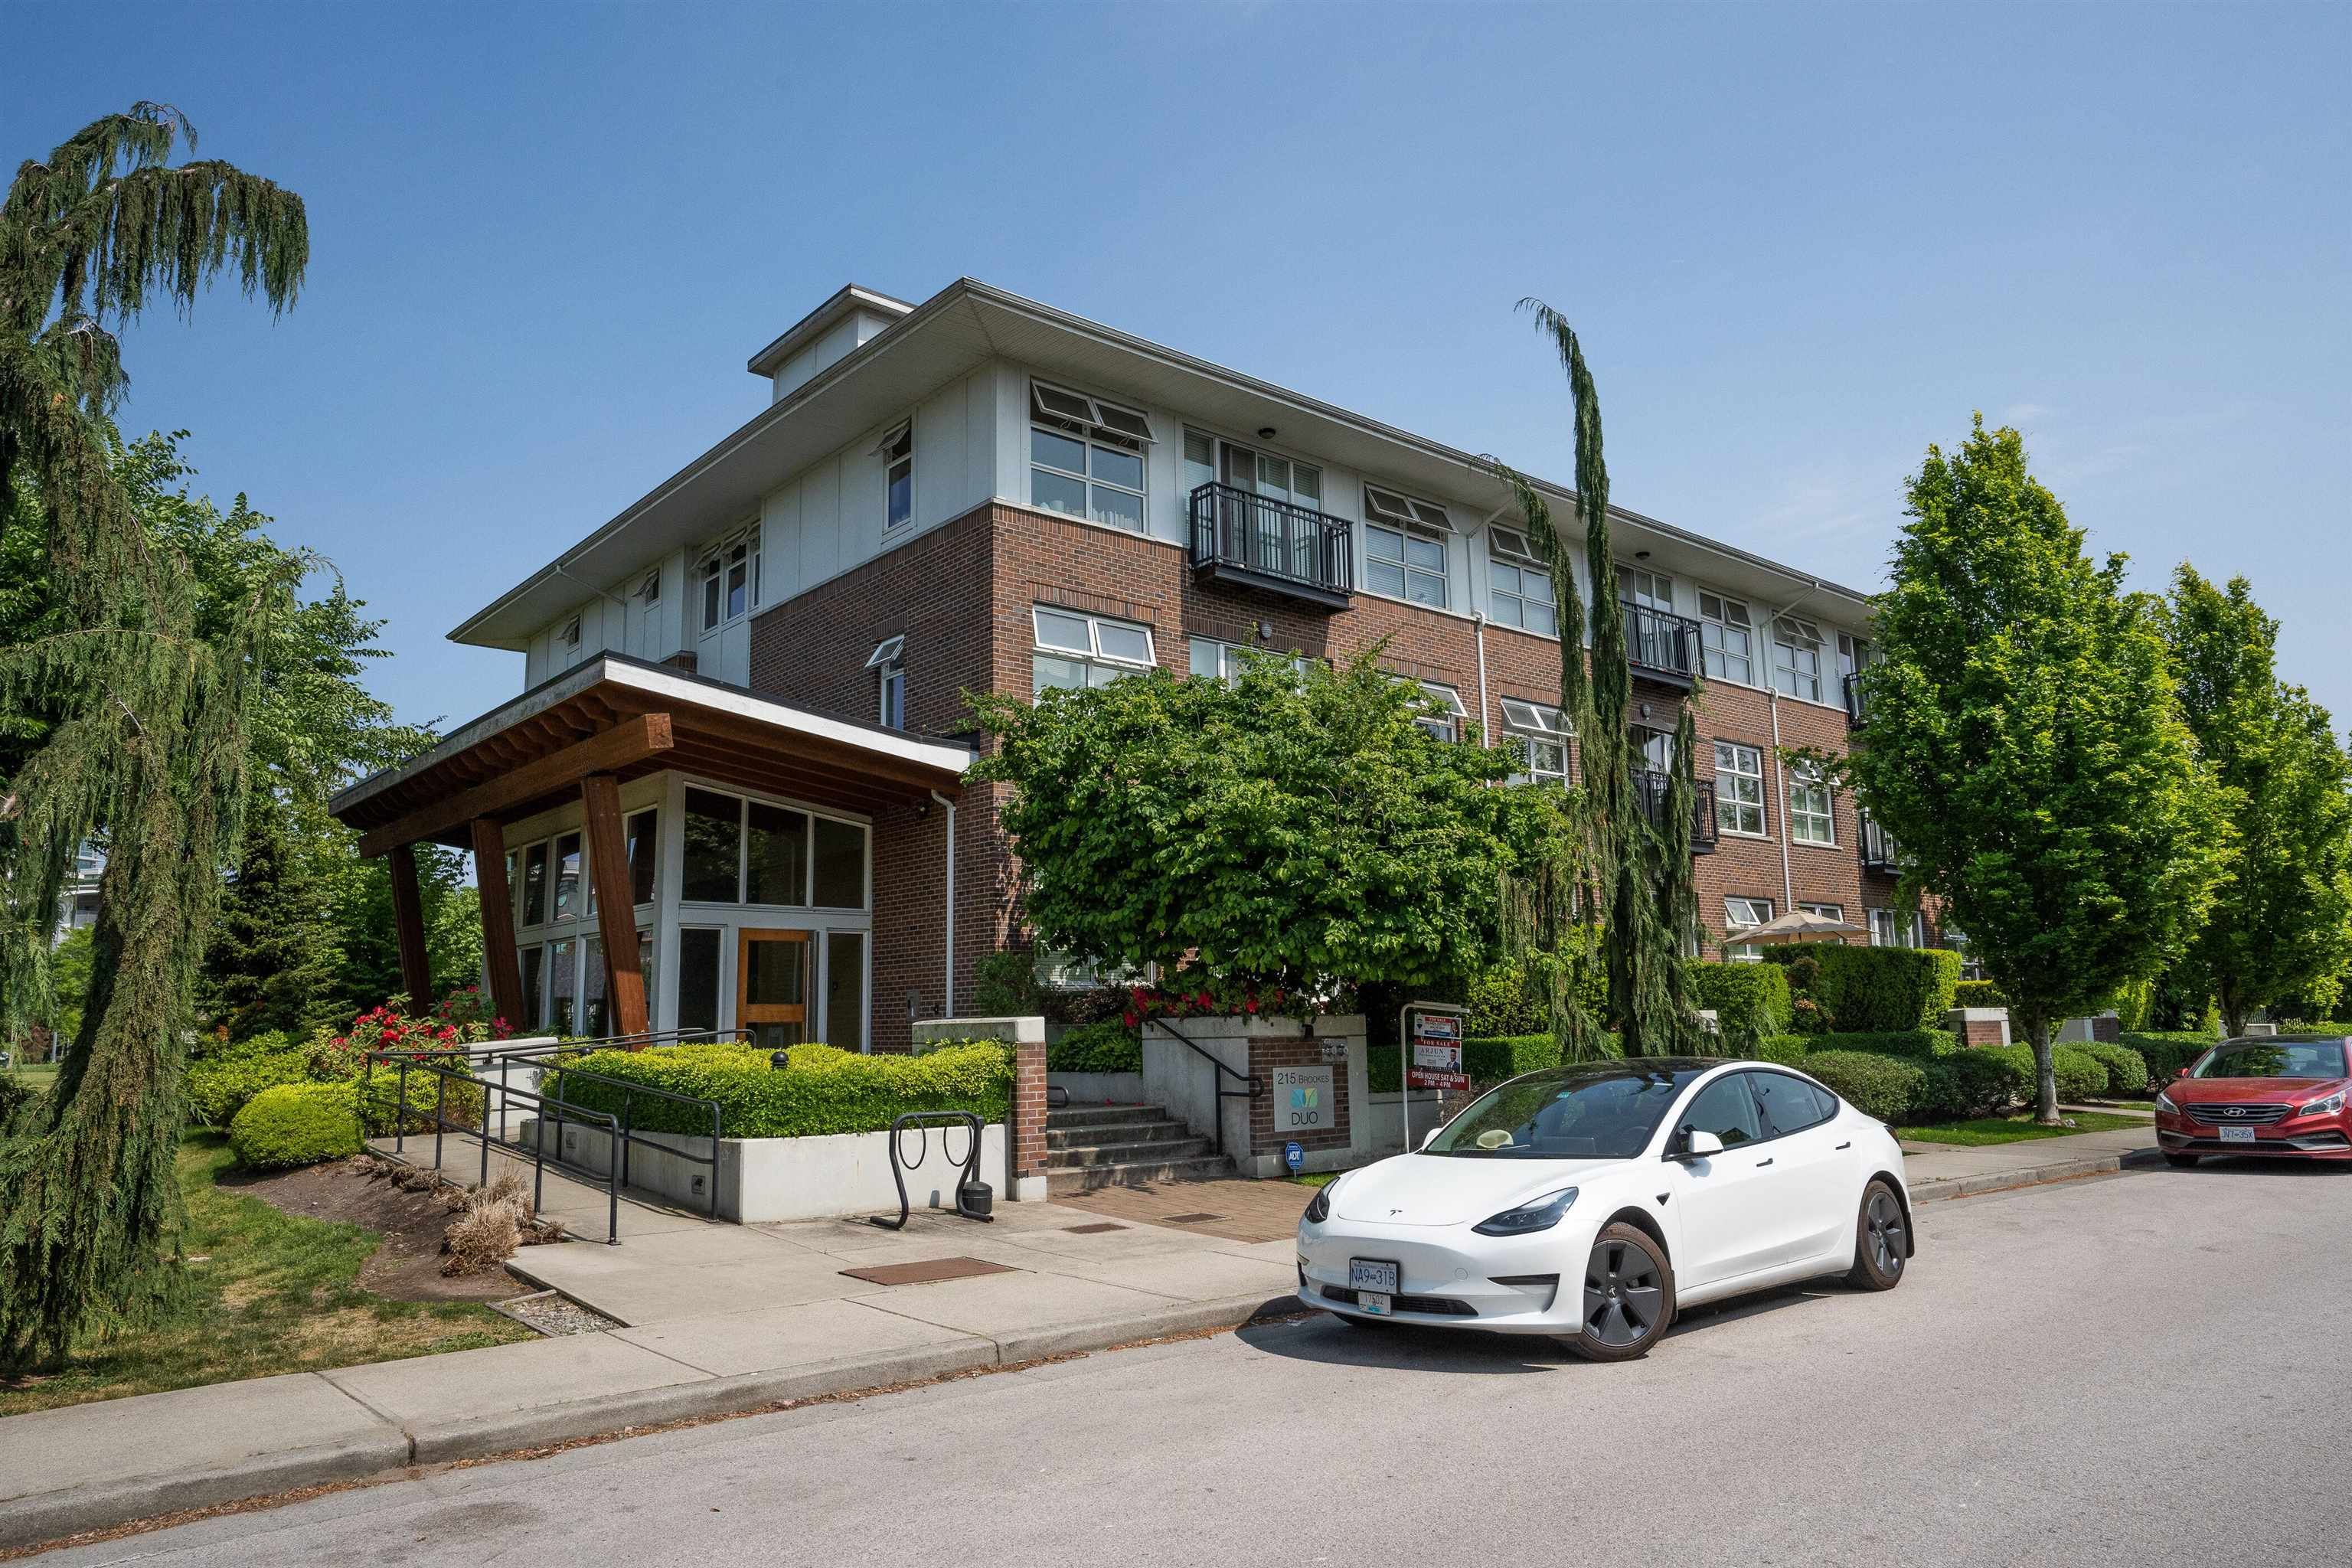 New property listed in Queensborough, New Westminster